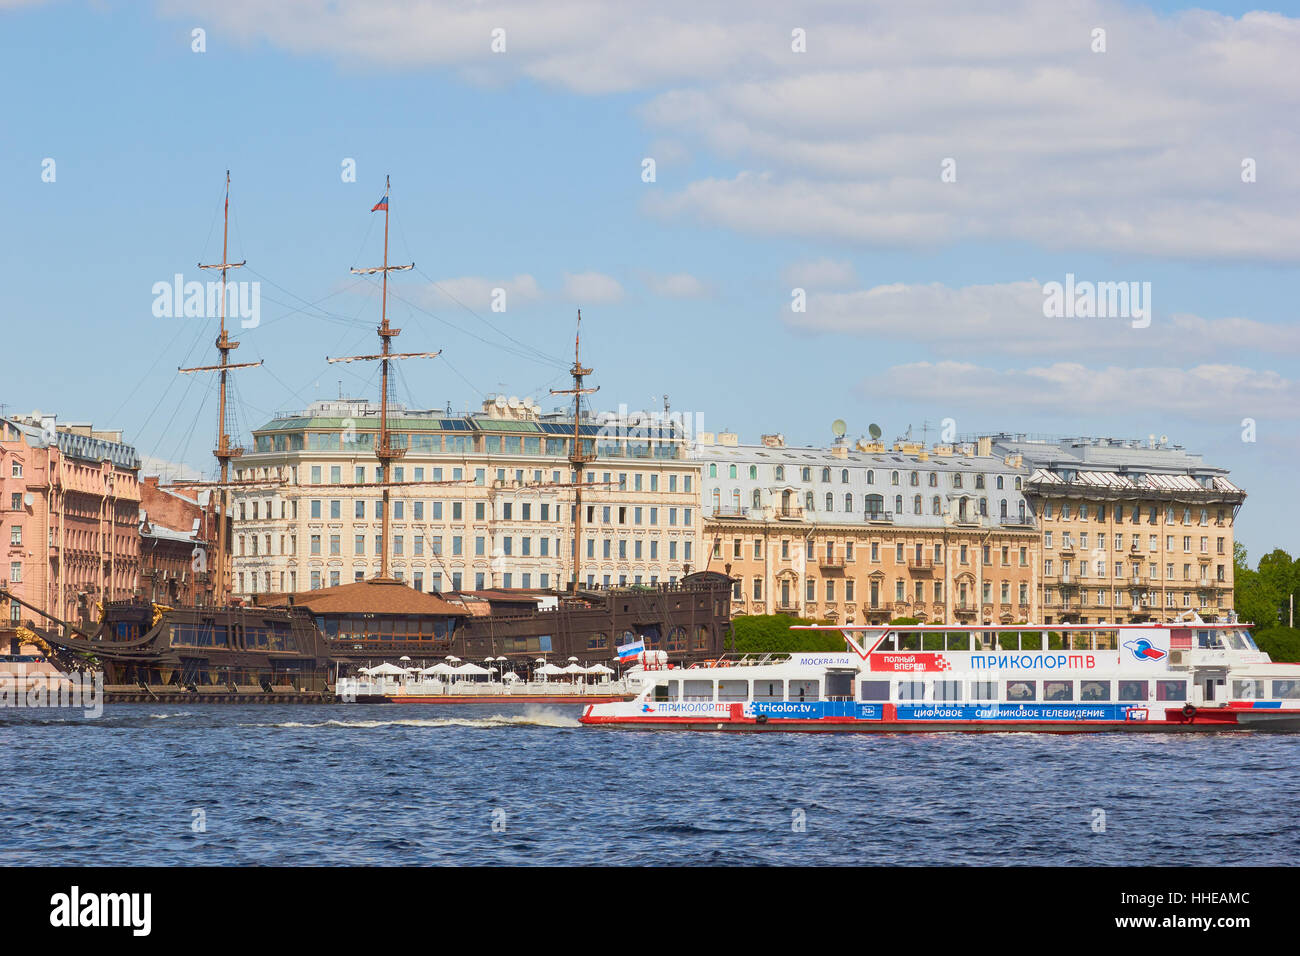 Restaurant ship the Flying Dutchman moored on the river Neva and river cruise boat St Petersburg Russia Stock Photo